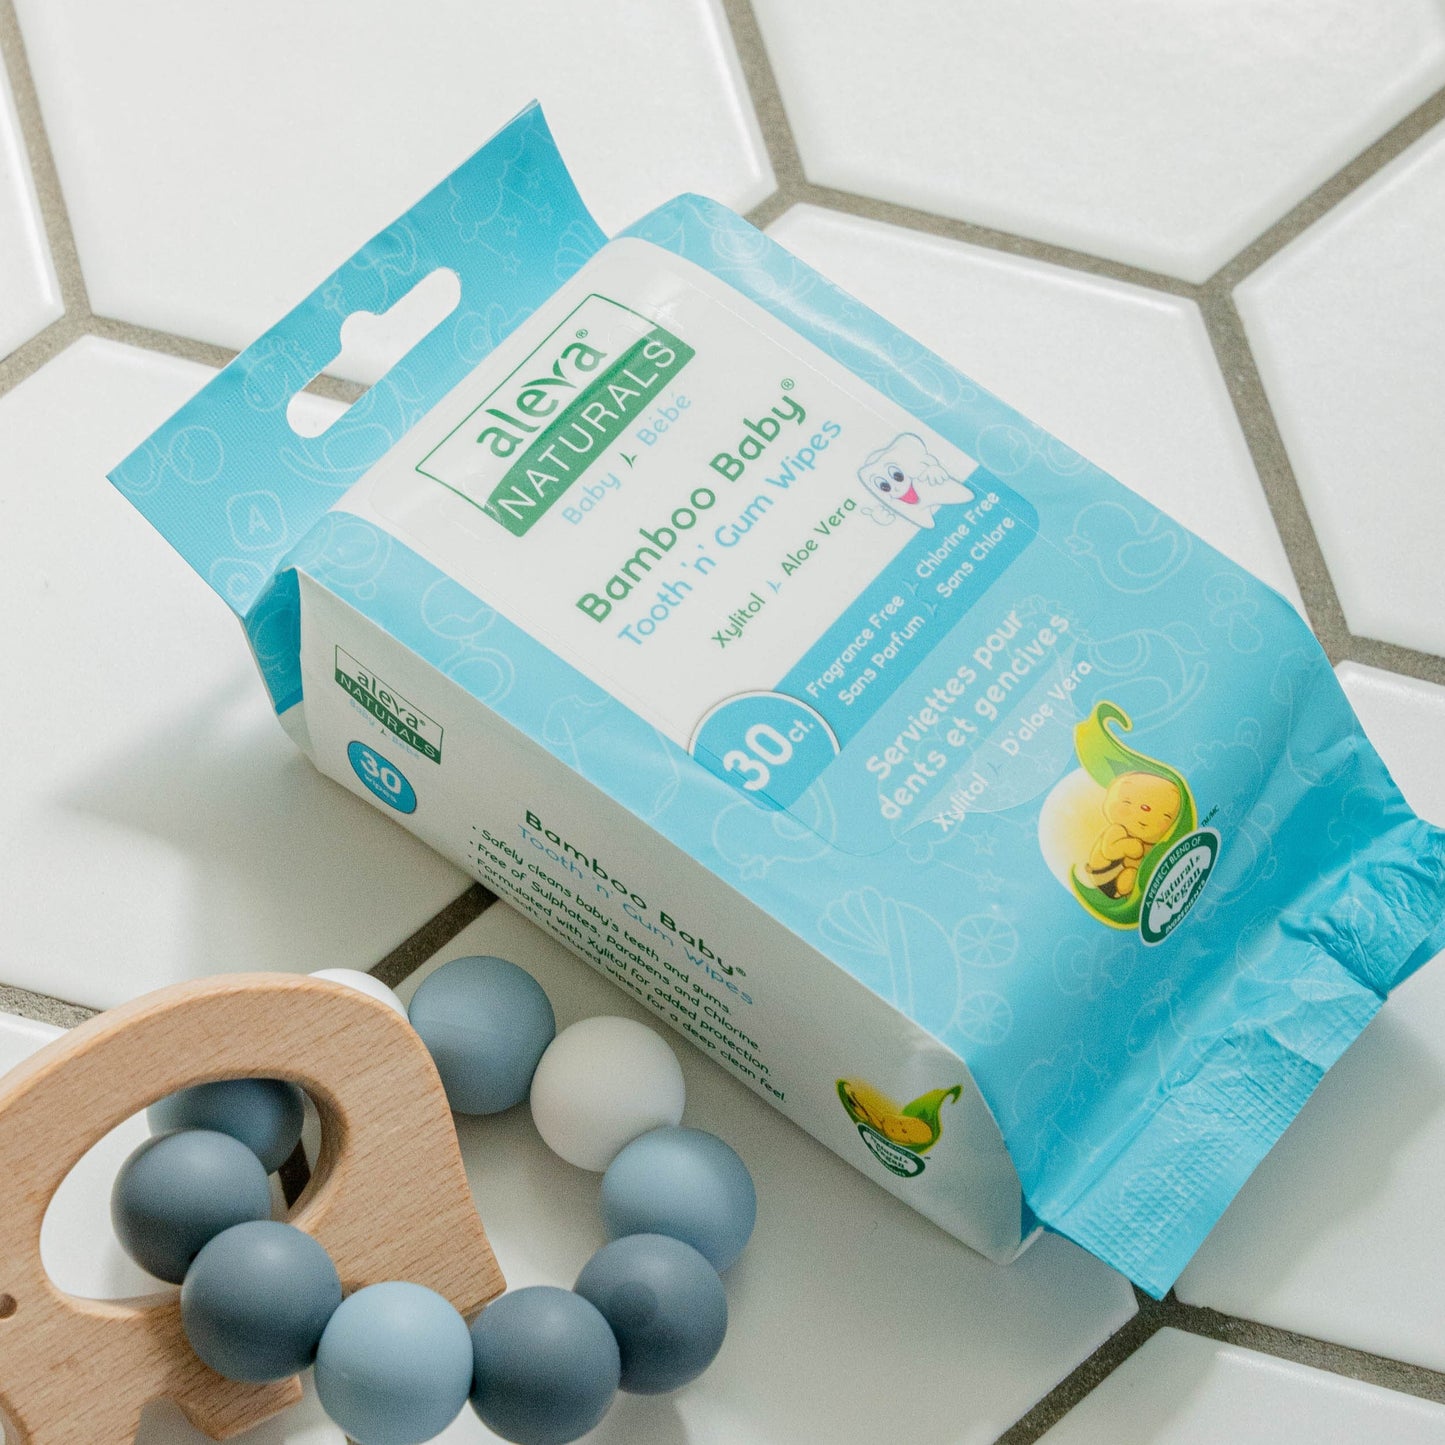 Bamboo Baby Tooth 'n' Gum Wipes